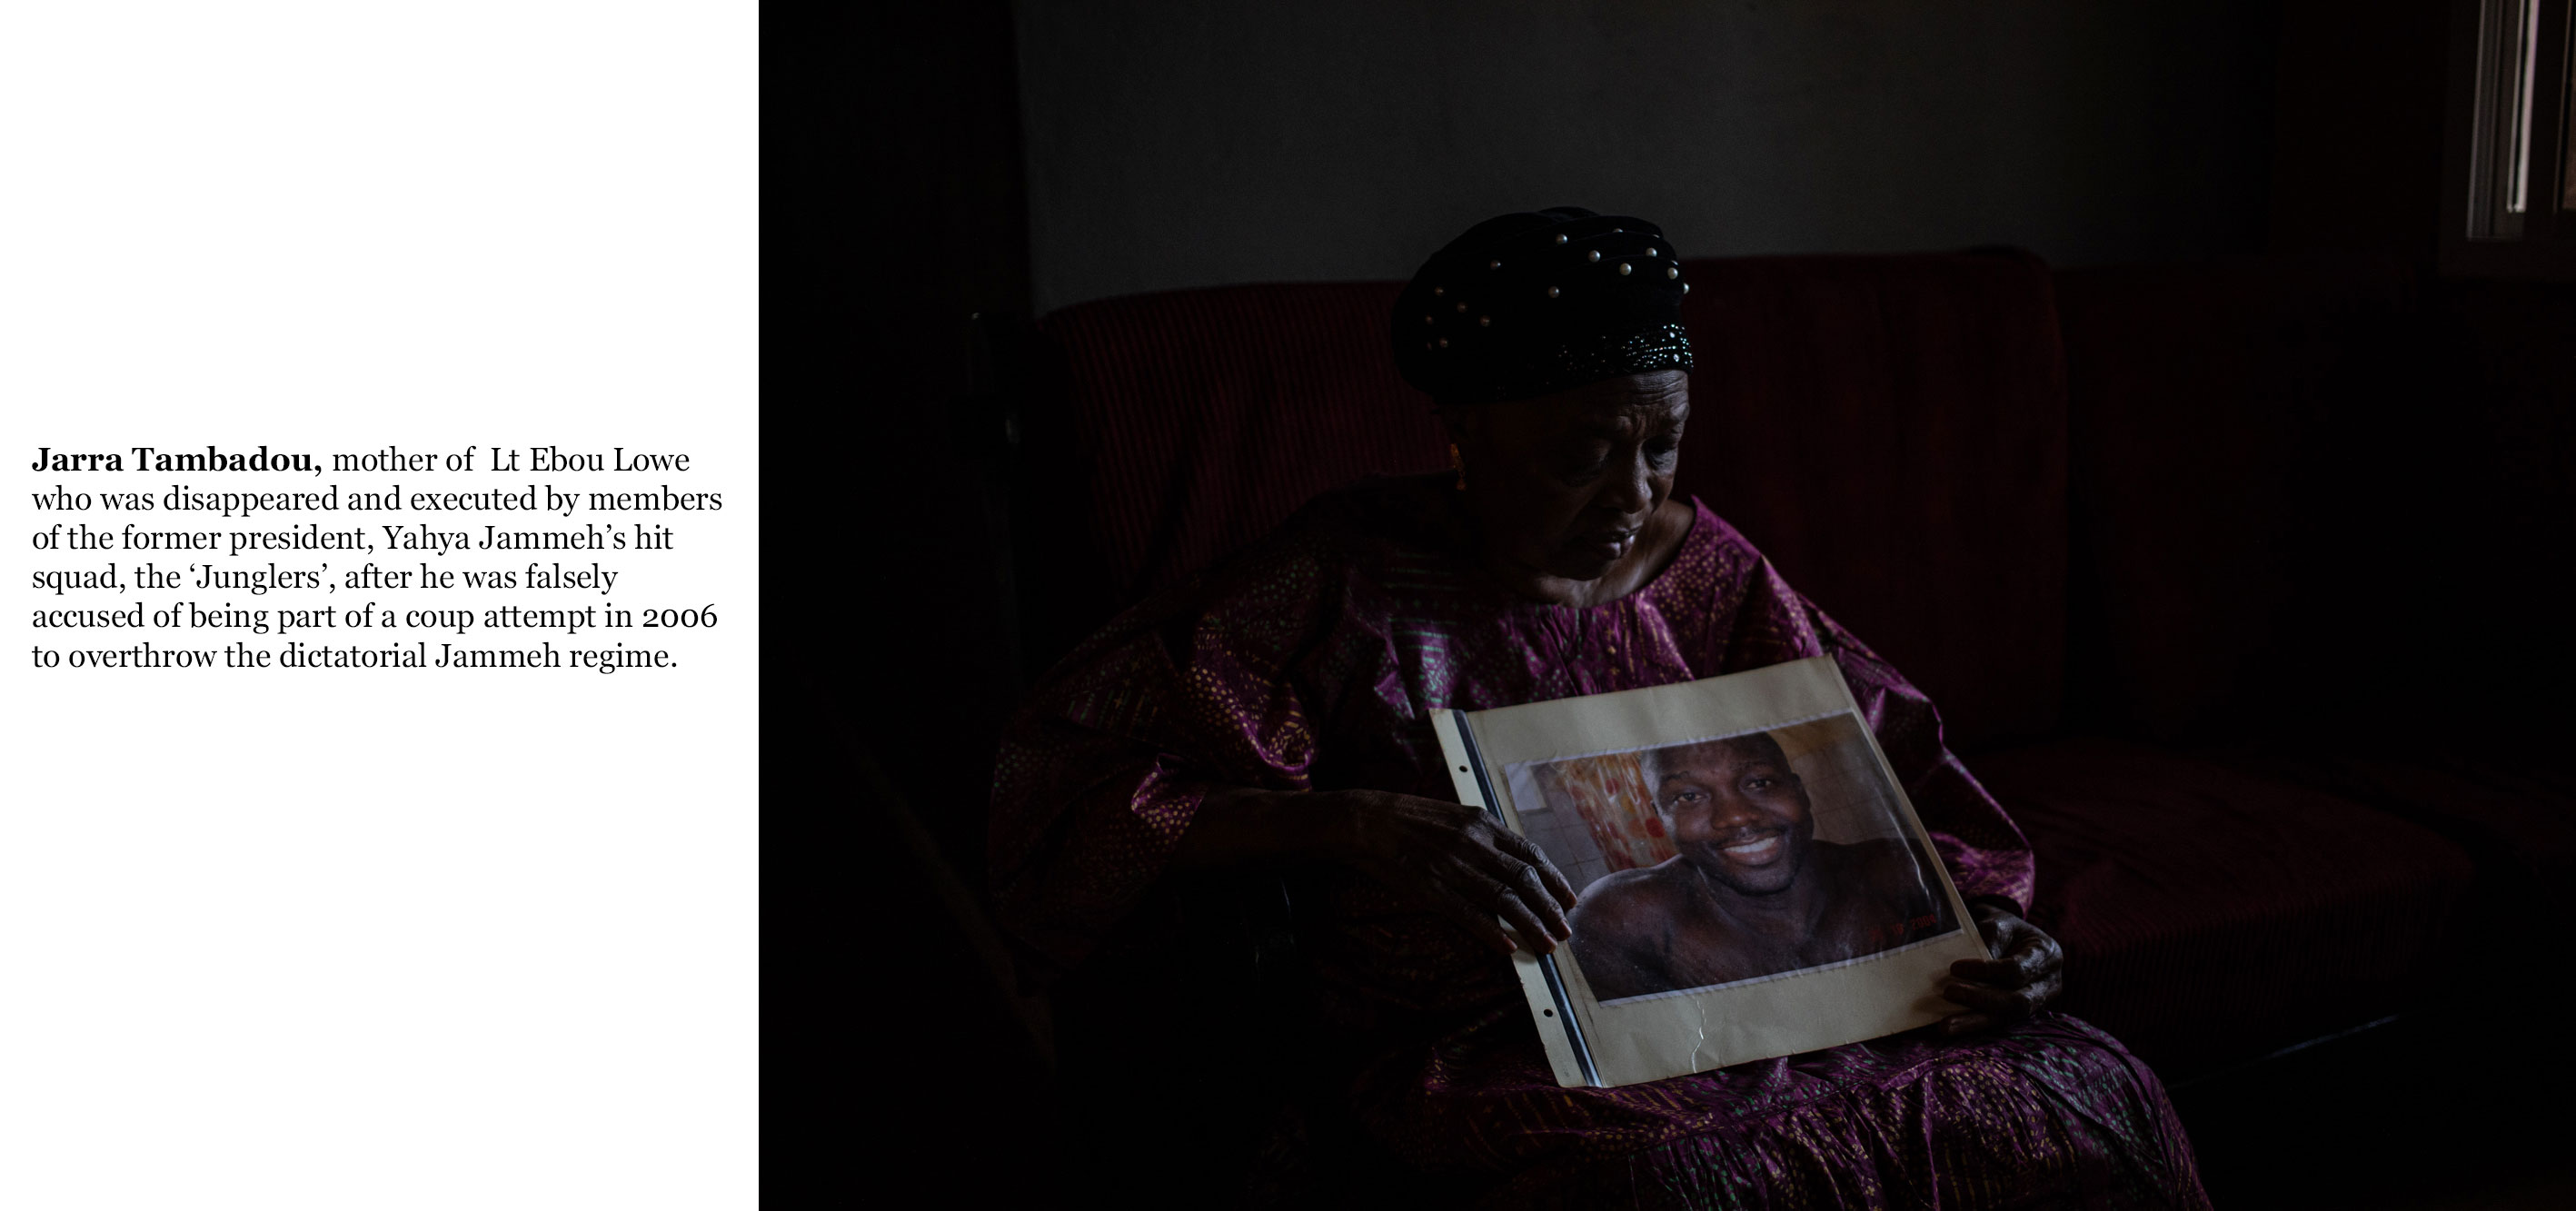 Gambia victims and resisters -jarra_tambadou, mother of Lt Ebou Lowe who was executed in 2006 by Gambian security forces, accused of a coup attempt-1768_TEXT_WEB ©Jason Florio